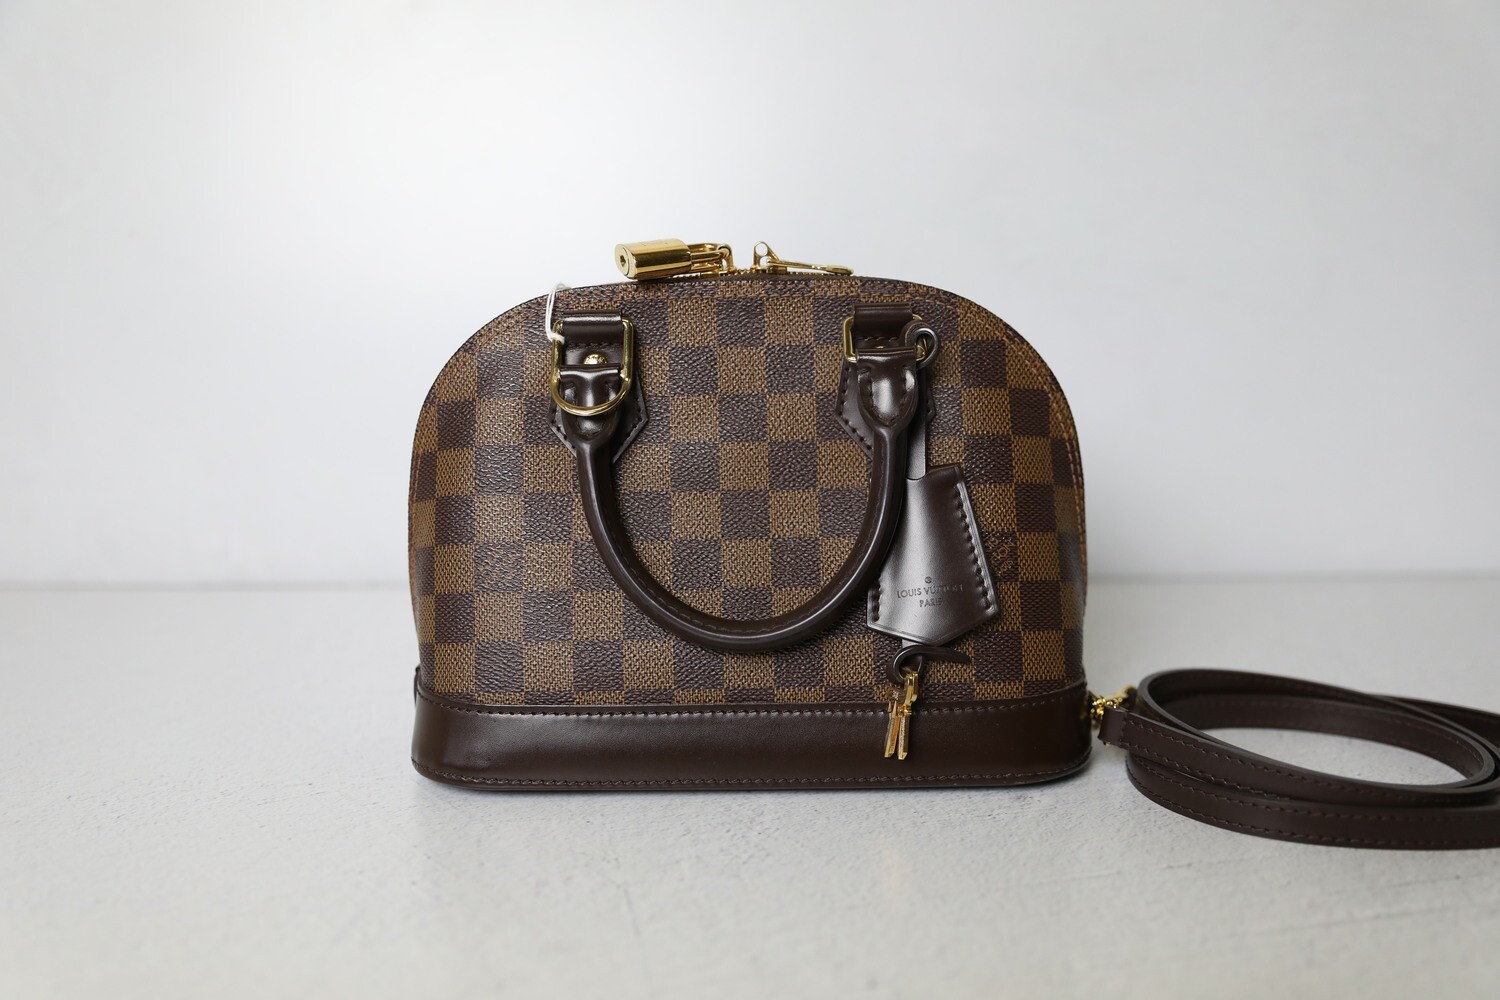 🧚🏻Louis Vuitton Alma BB Damier Ebene 🧚🏻$1,299 usd invoiced and shipped  🧚🏻With strap, lockset, dustbag, - Grancha Kauzo Japan Second Hand  Luxury Bags & Accessories